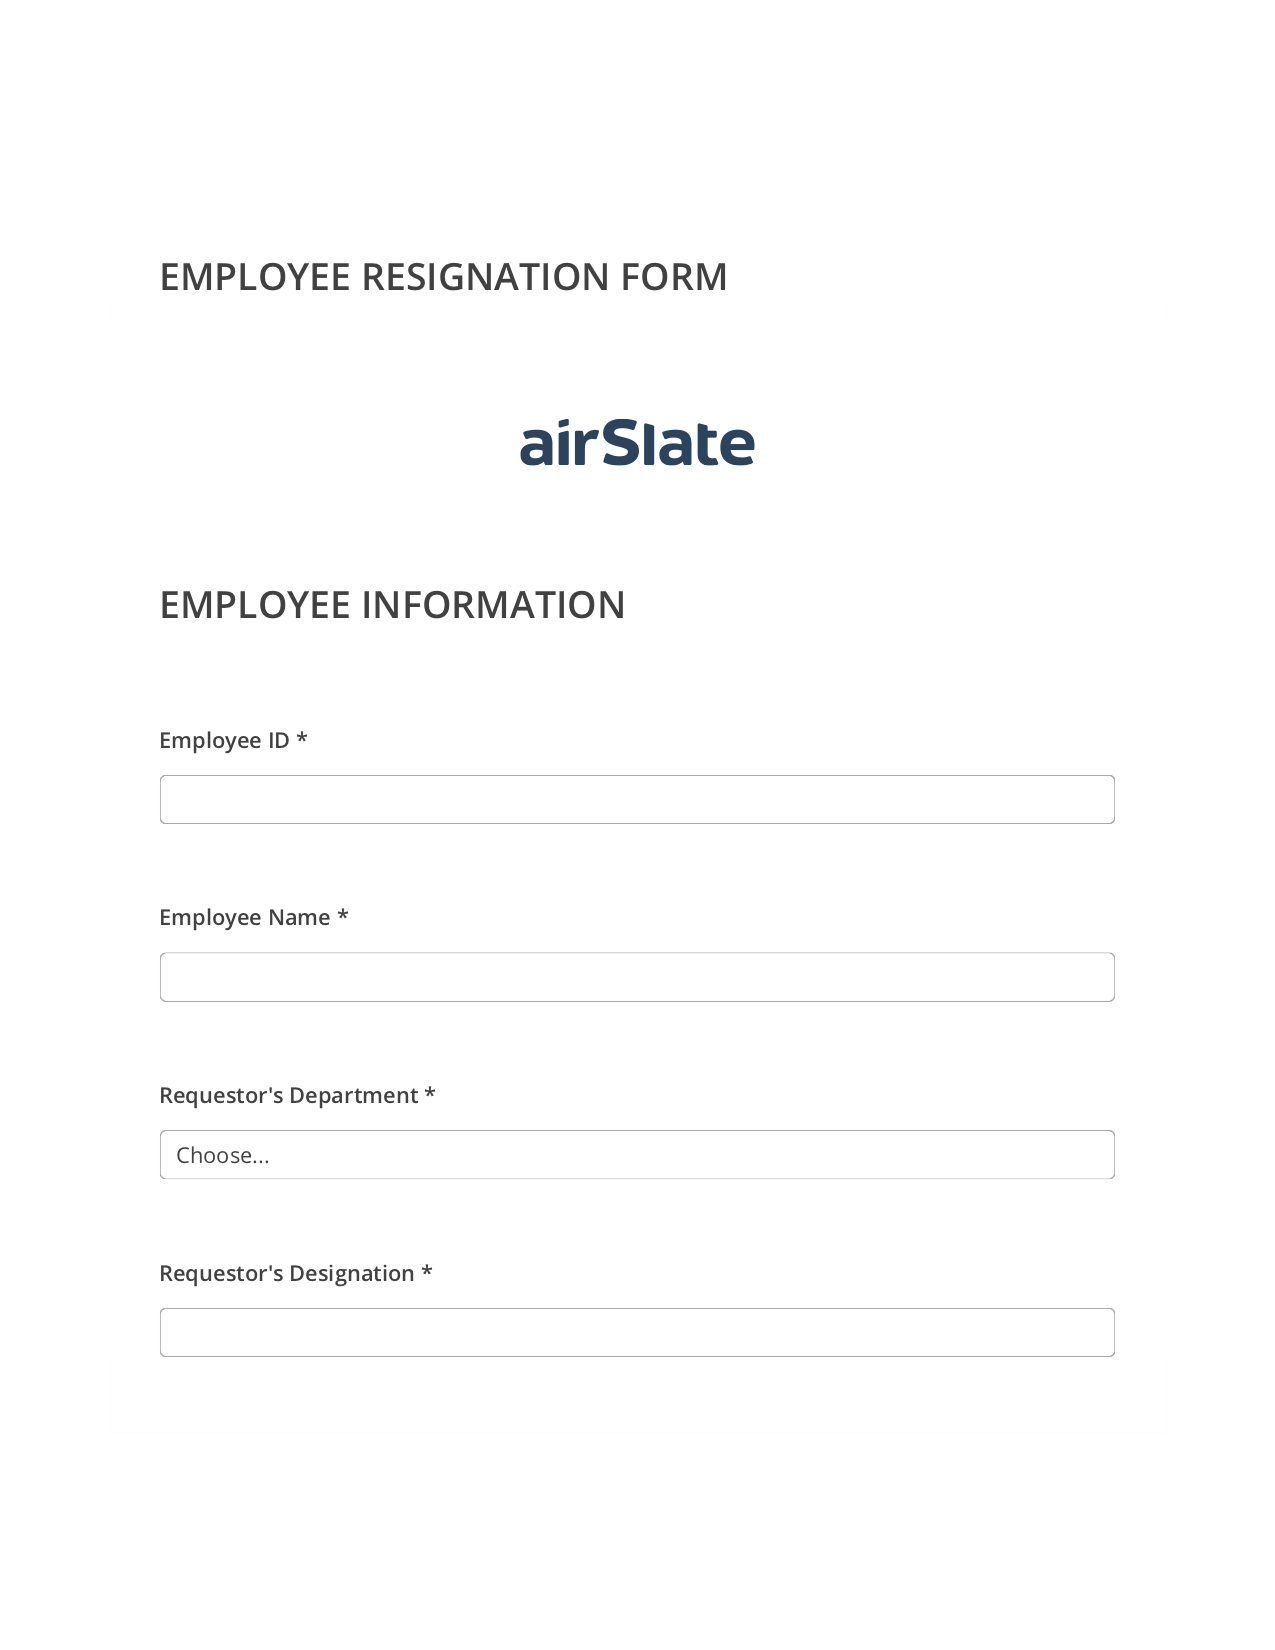 Employee Resignation Request Flow Pre-fill Slate from MS Dynamics 365 Records